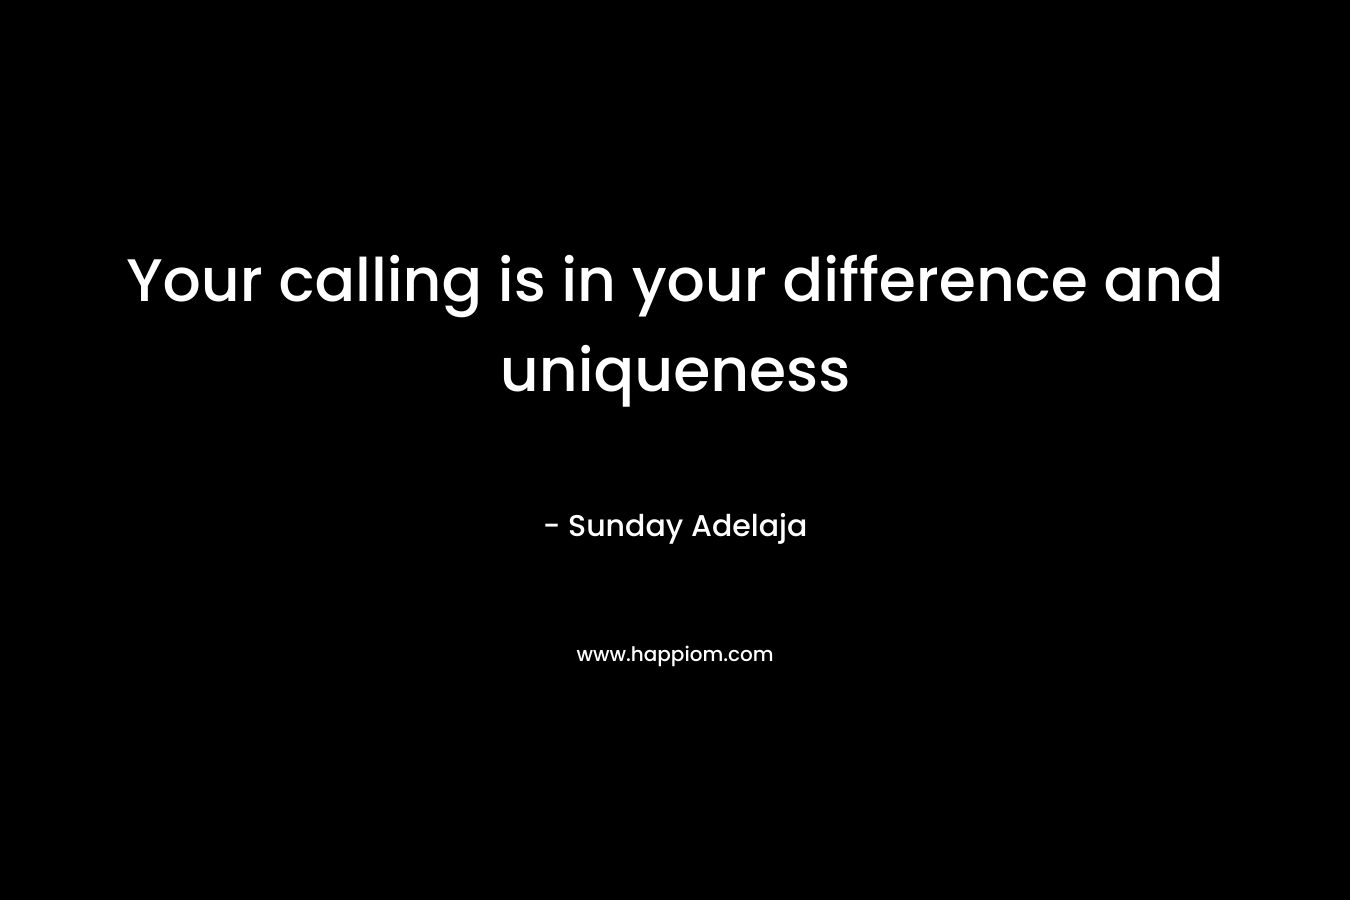 Your calling is in your difference and uniqueness